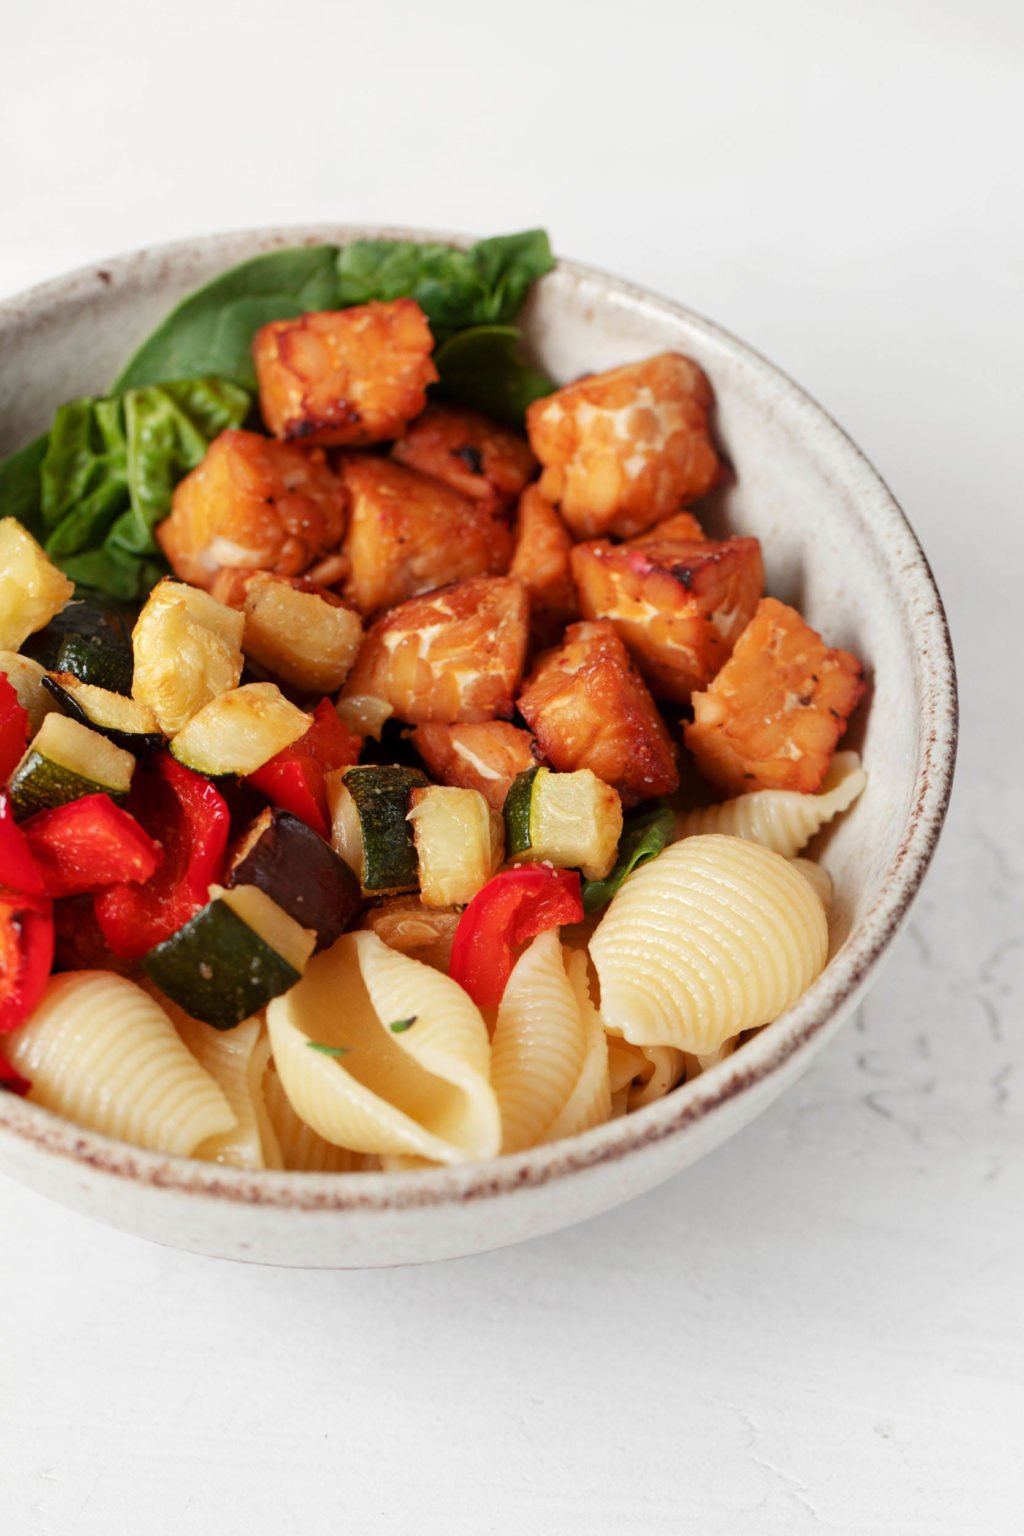 A round, white ceramic bowl has been filled with a colorful tempeh vegetable pasta dish. It rests on a white surface.